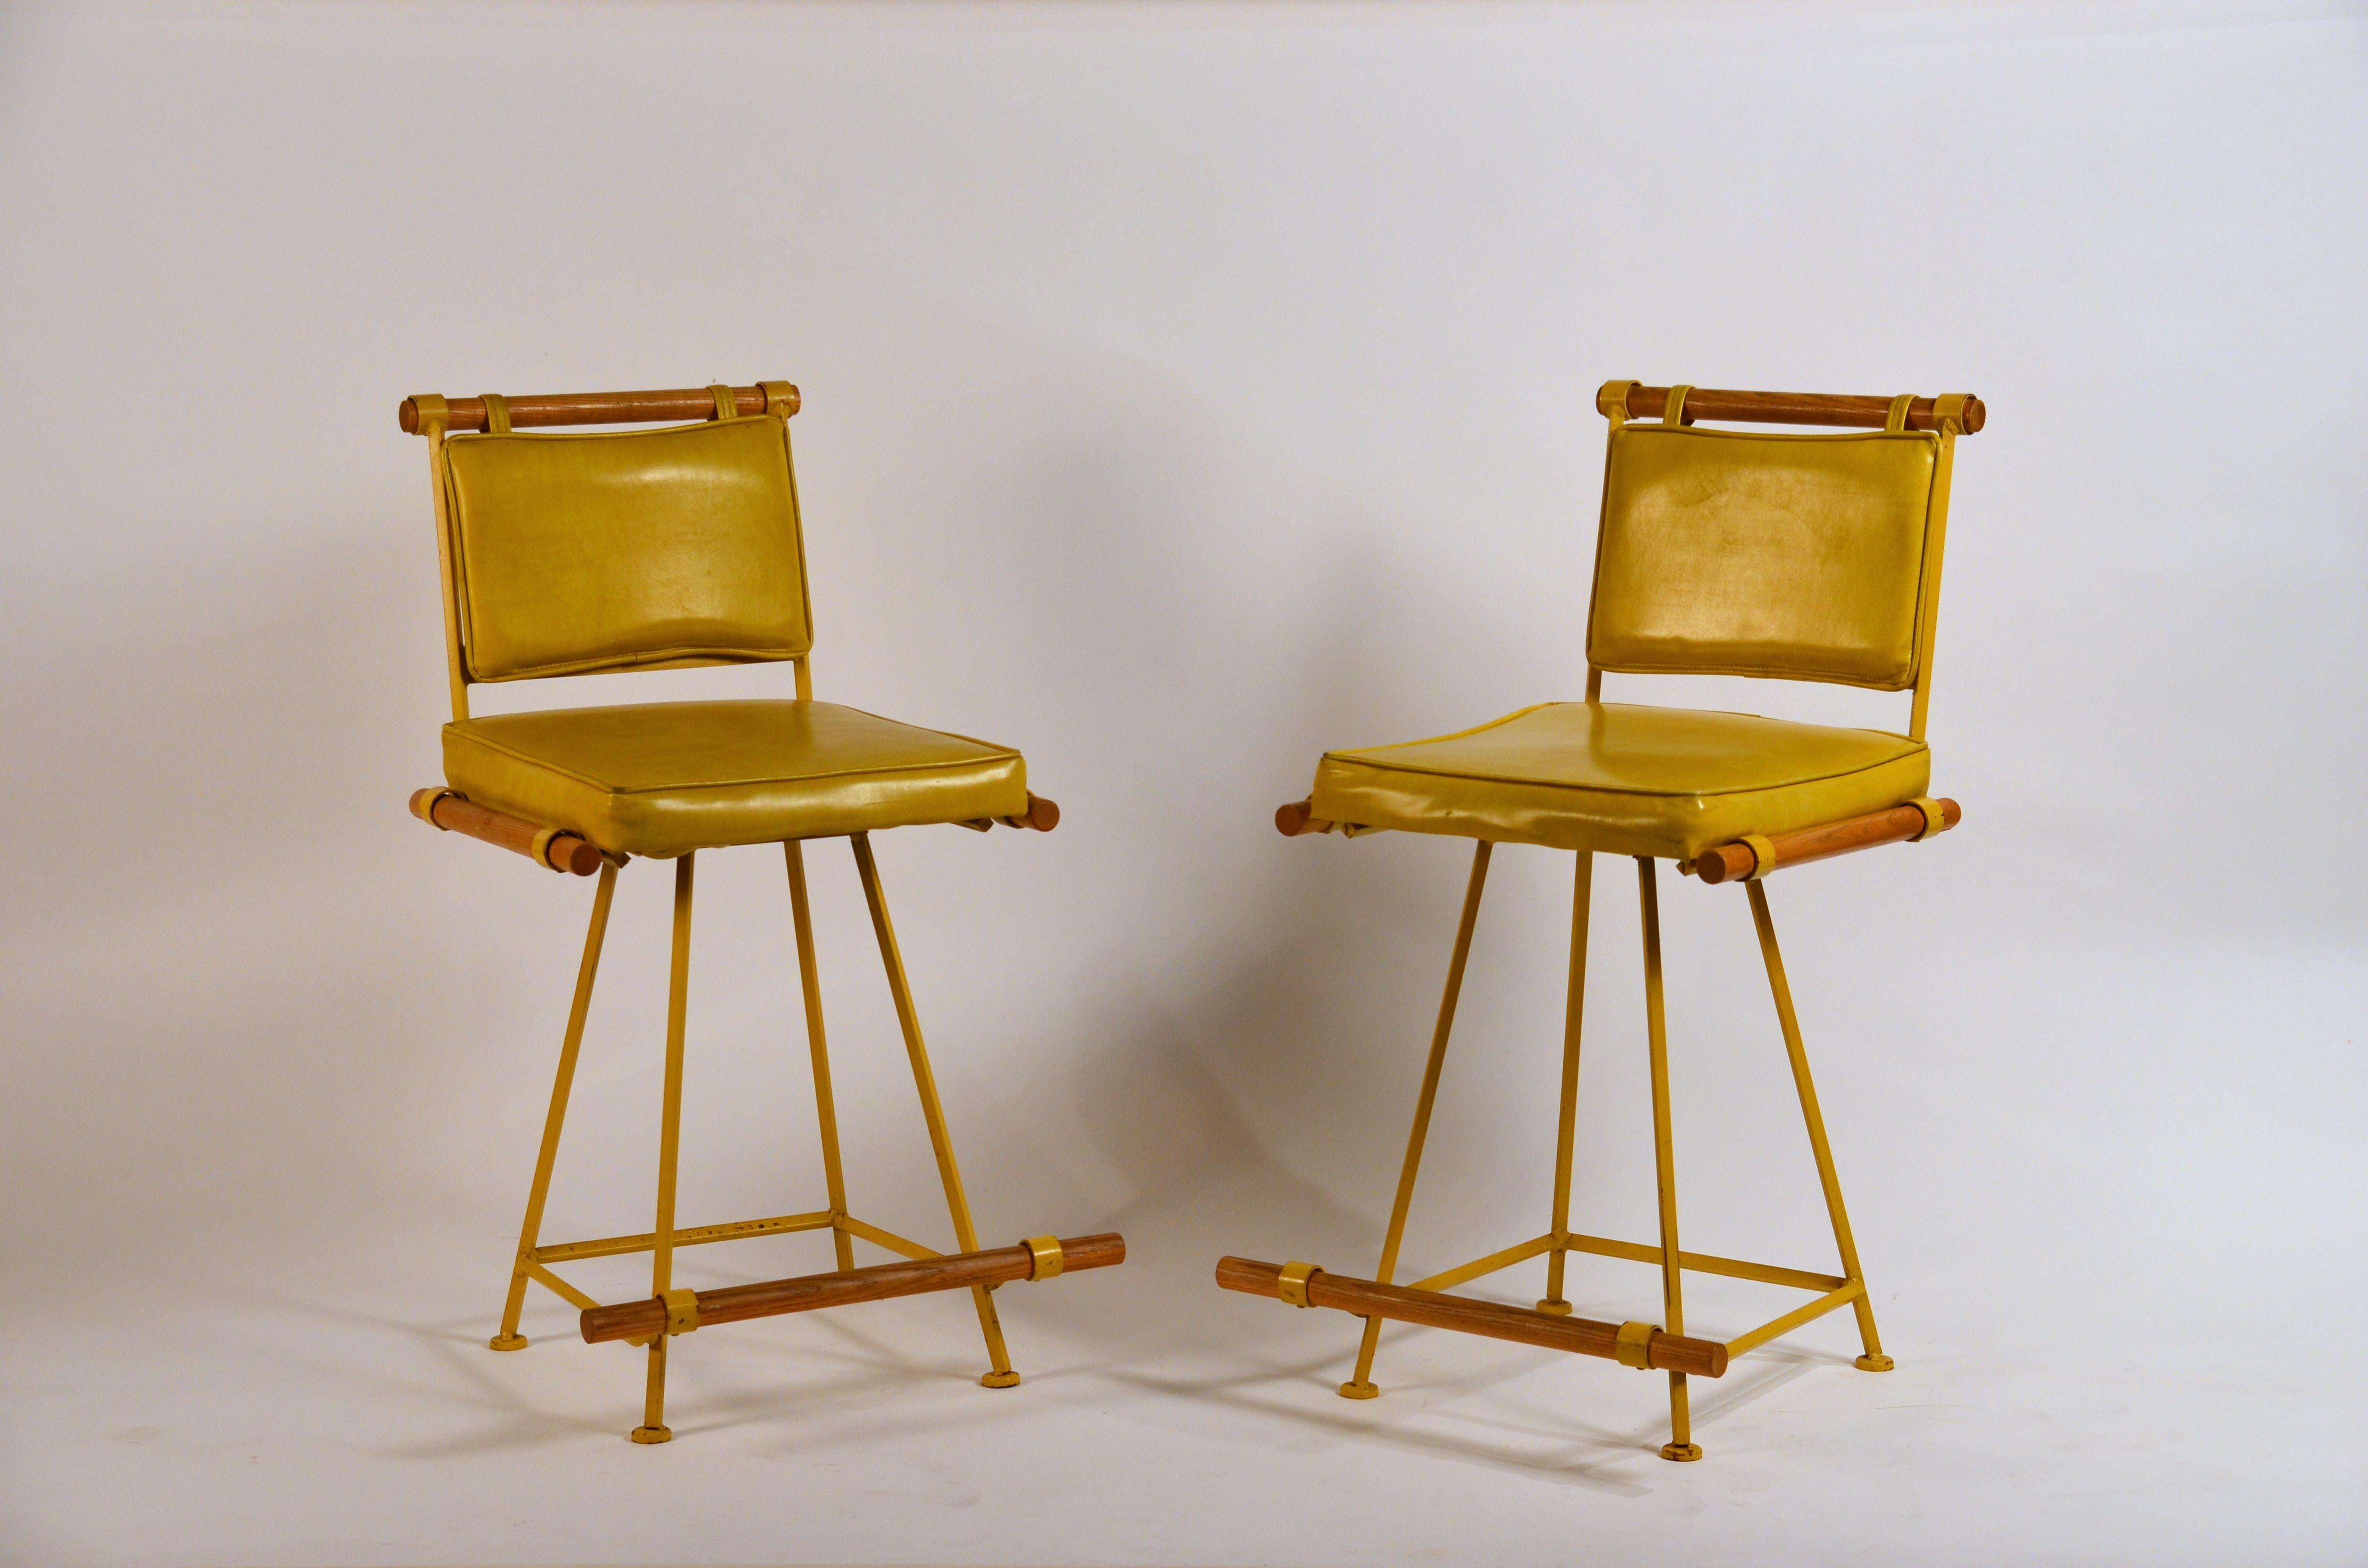 Upholstery Pair of Yellow 'Los Feliz' Swiveling Counter Stools by Design Frères